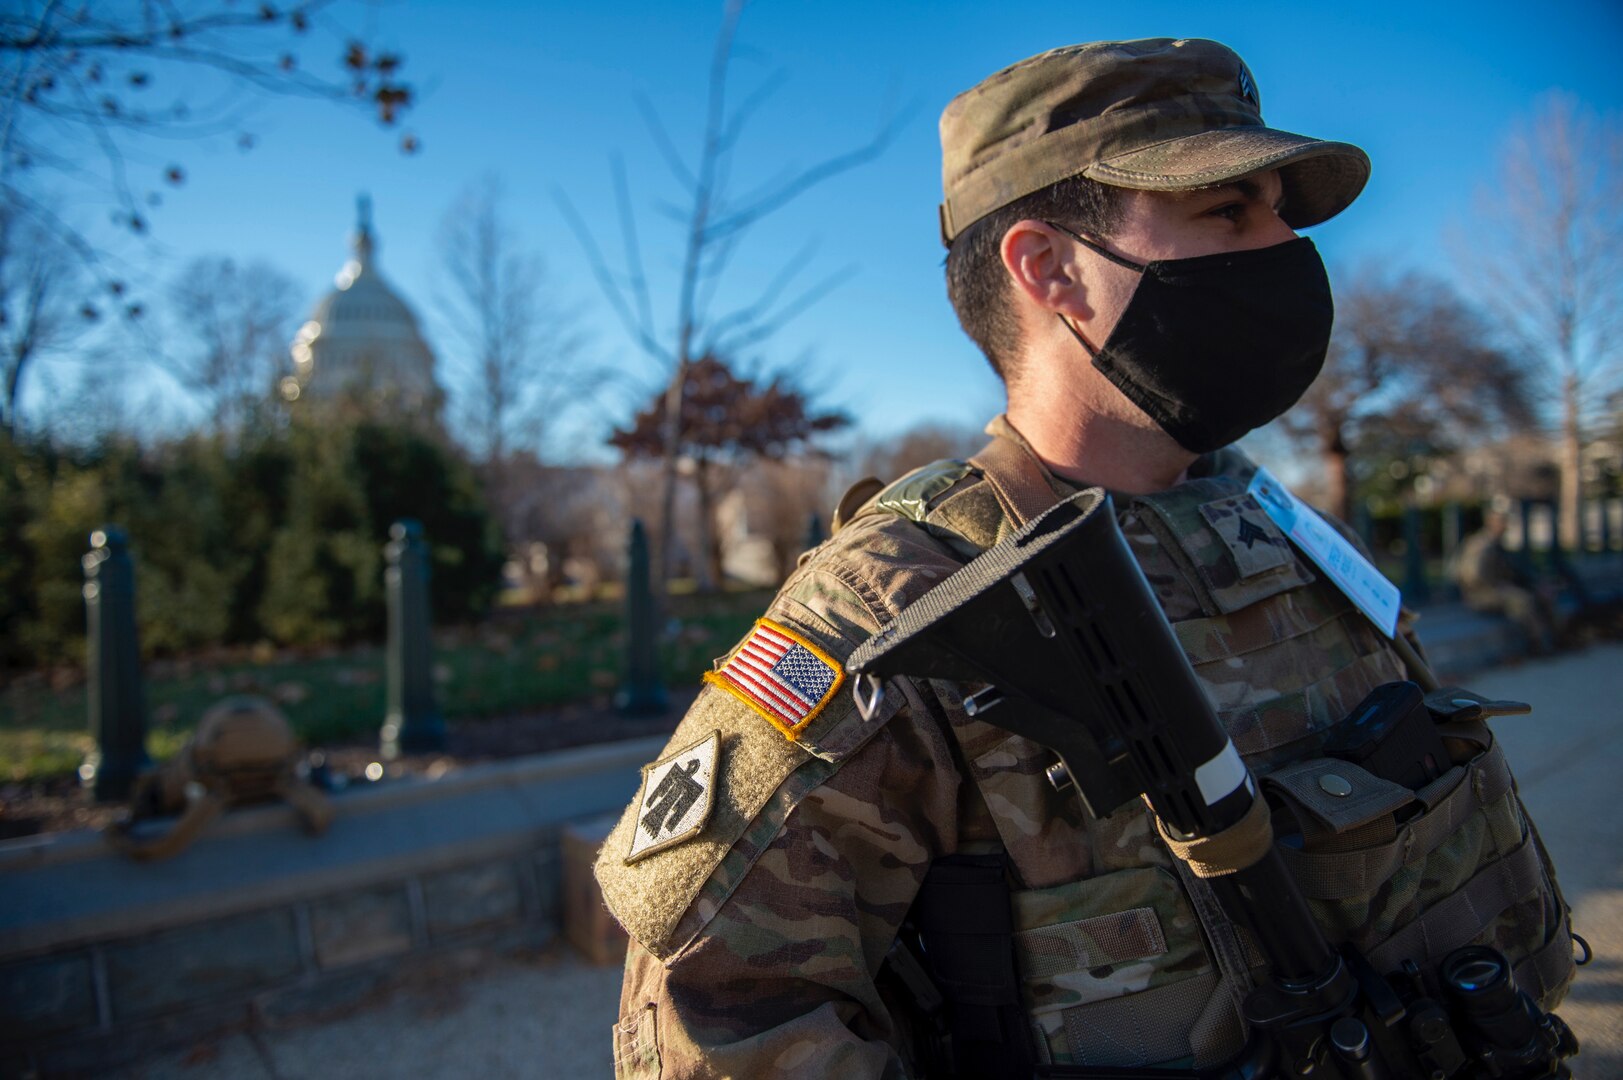 An Oklahoma Army National Guard Soldier provides security near the U.S. Capitol, Jan. 19, 2021. Some 7,900 Guard members from around the country remain in the nation's capital in February assisting local and federal authorities, down from a force of about 26,000 during the inauguration.